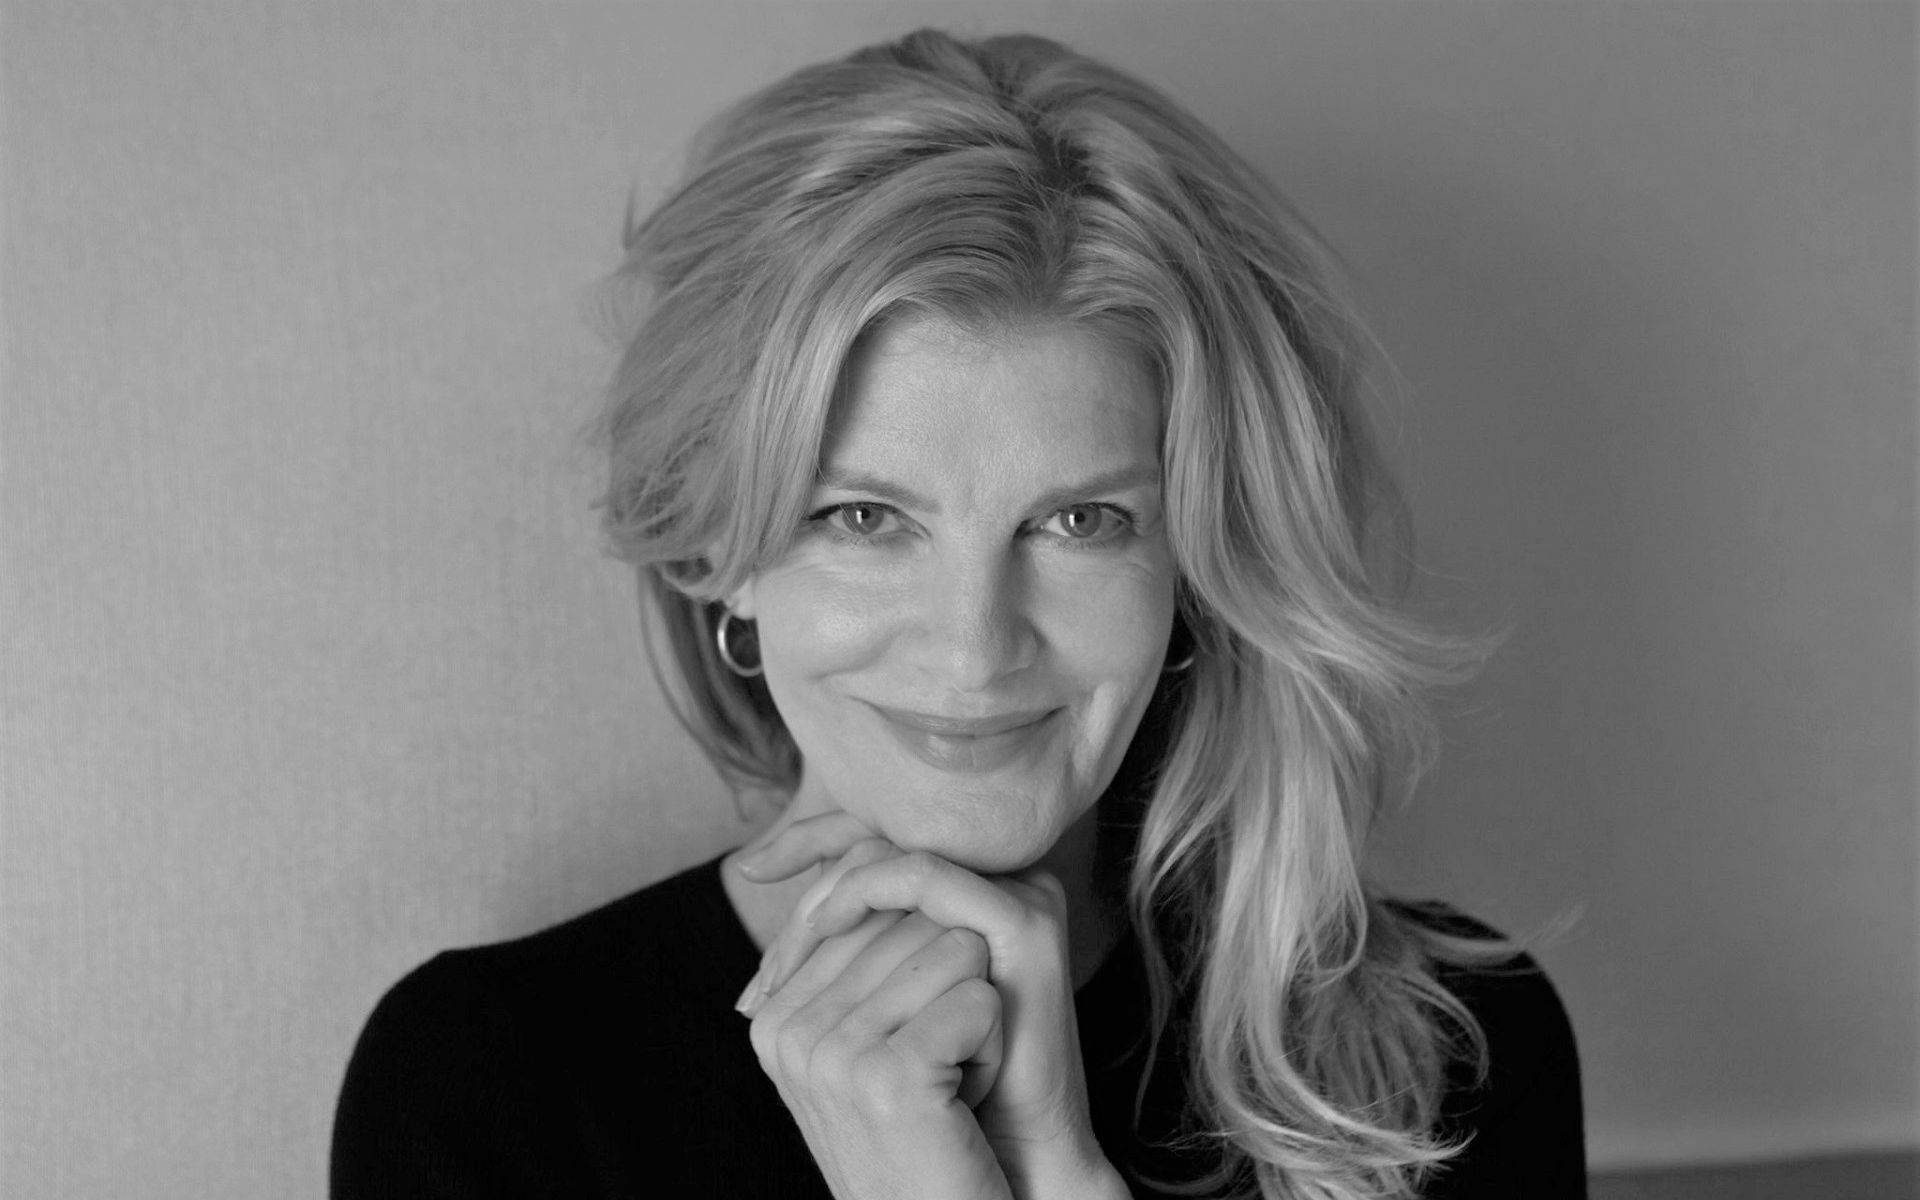 Rene Russo For Los Angeles Times Greyscale Photograph Wallpaper